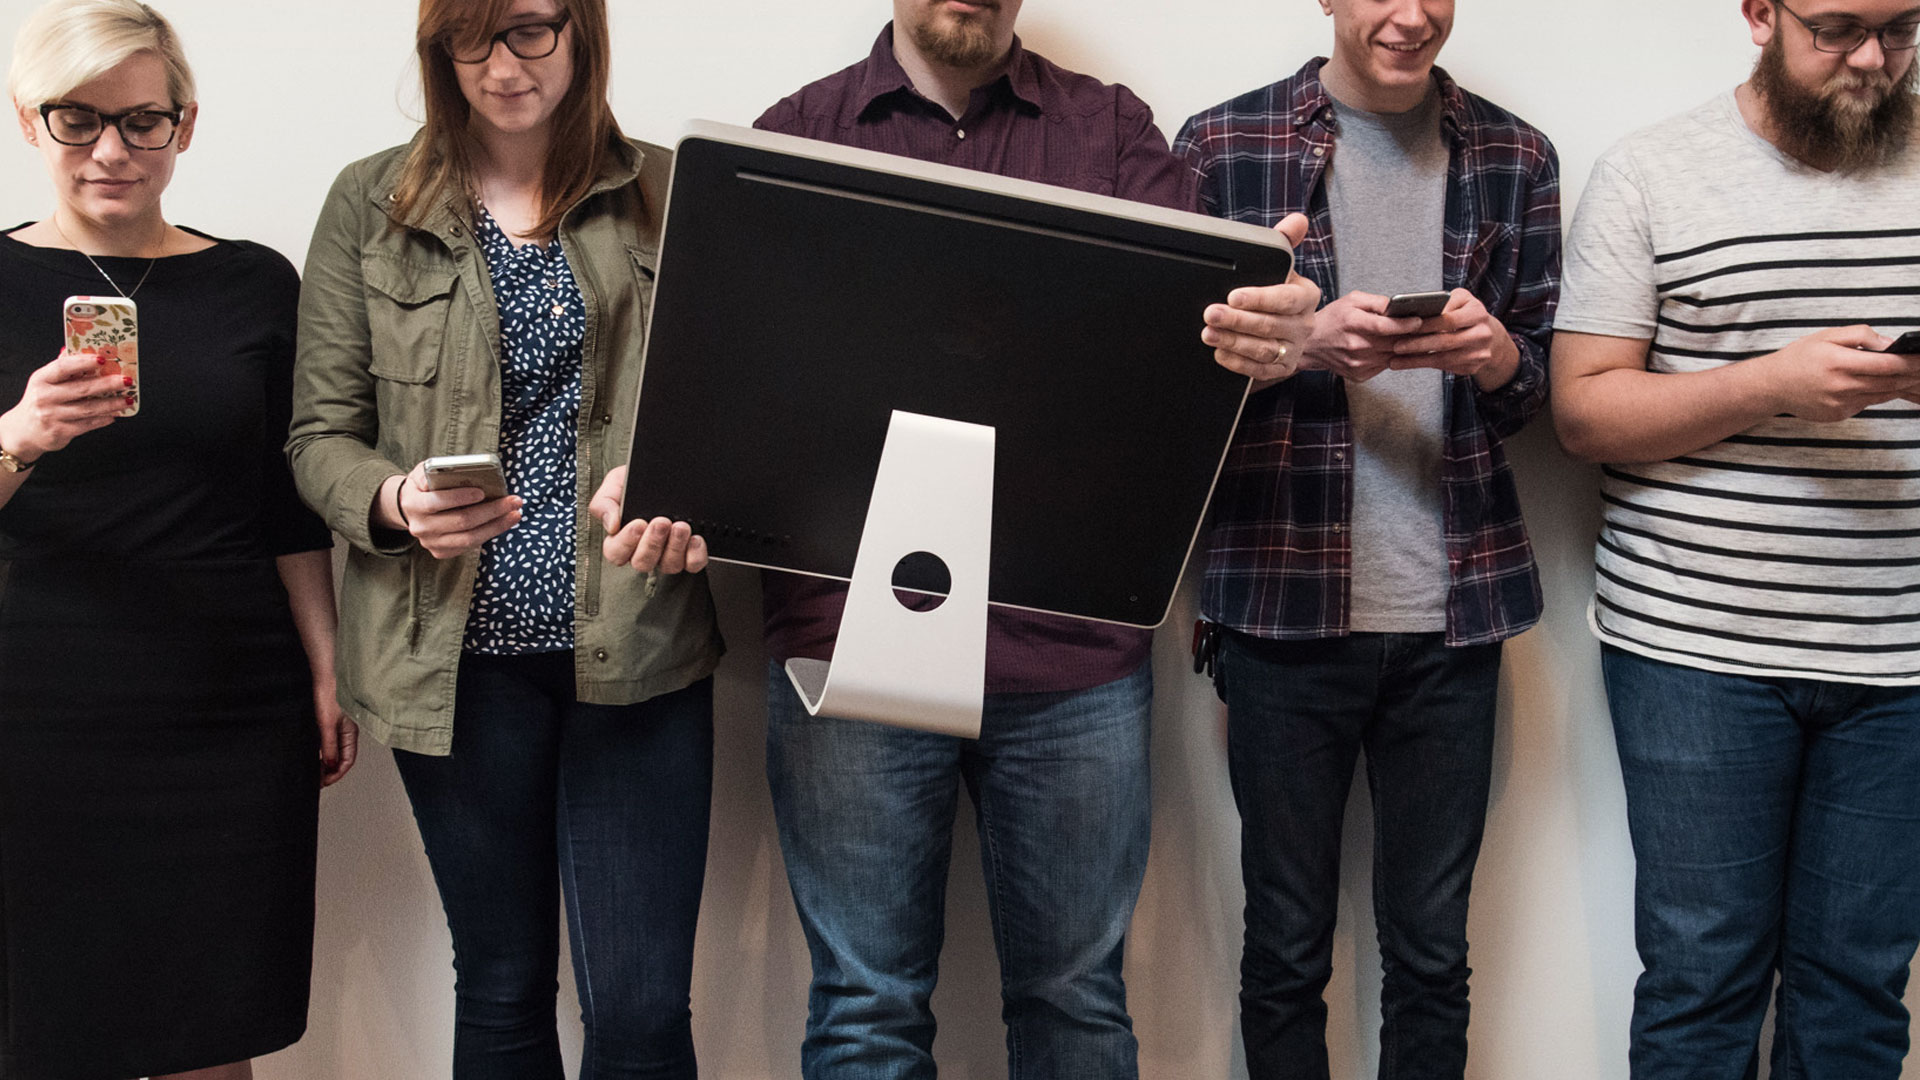 Creatives at Atomidust holding different sized electronic devices